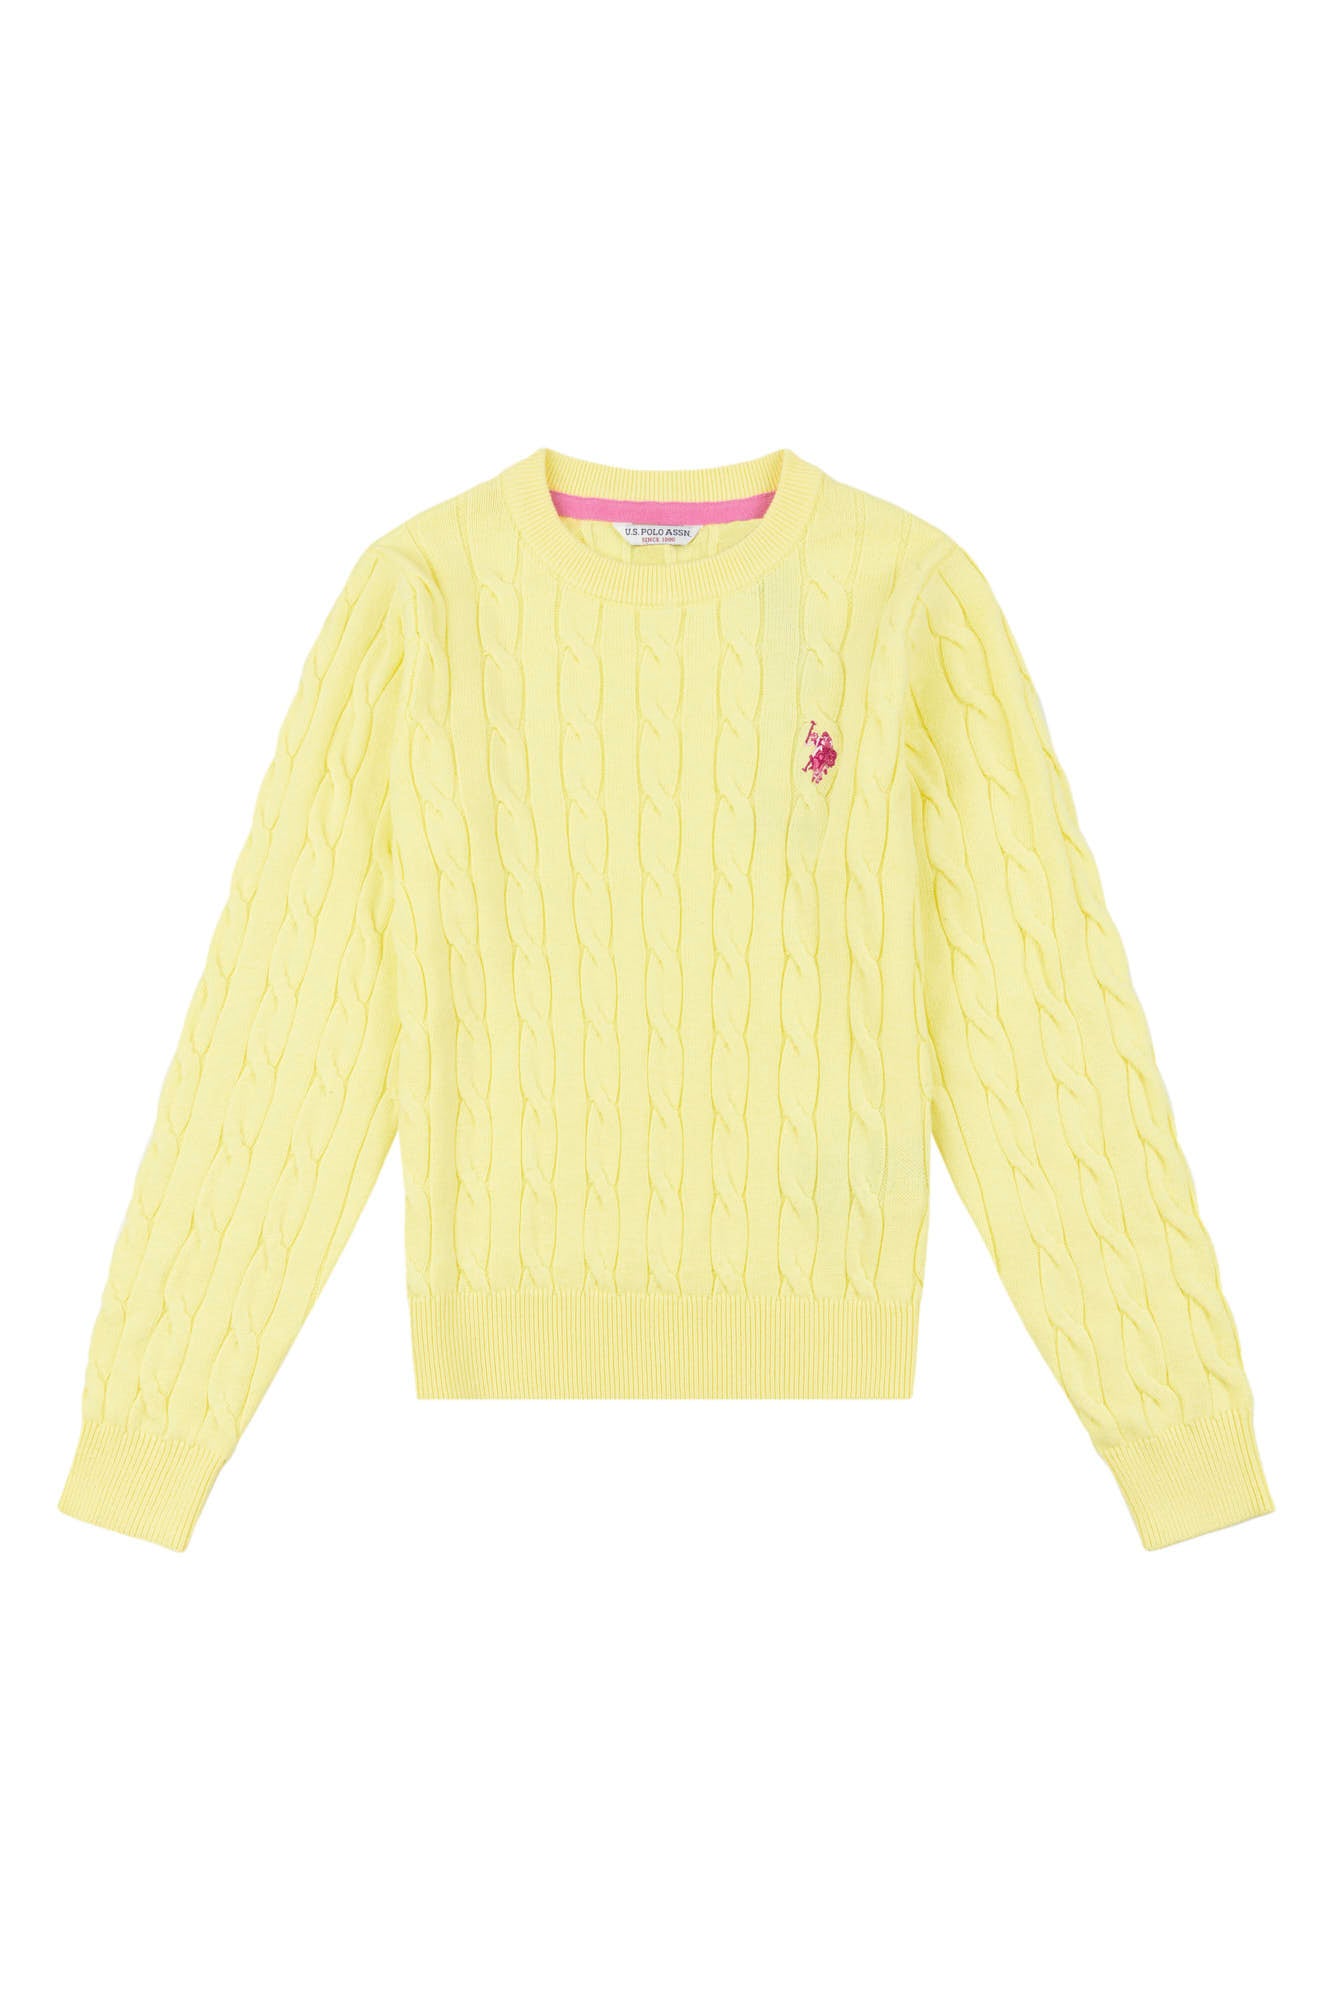 Girls Cable Knit Jumper in Yellow Pear